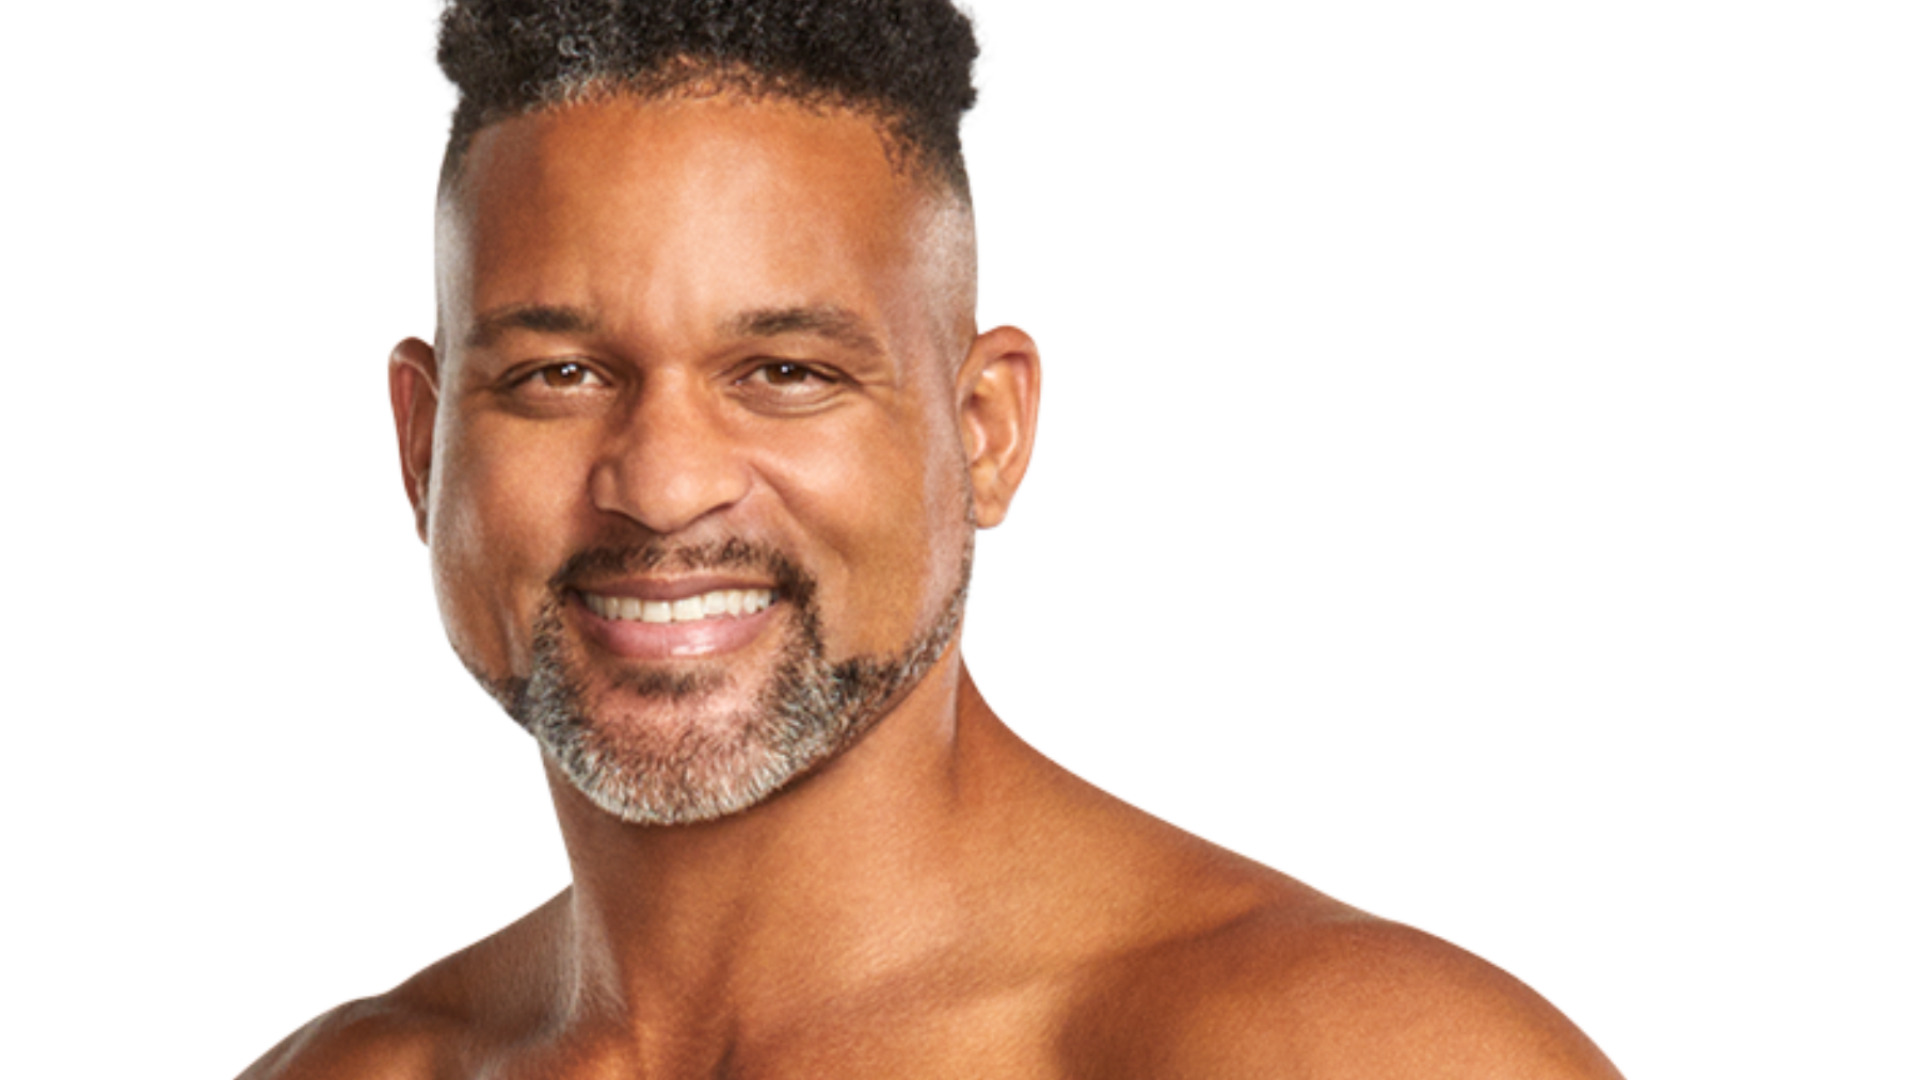 Shaun T's Hair Changed During The Pandemic And It Led To A Change In The Way He Saw Himself And Fitness